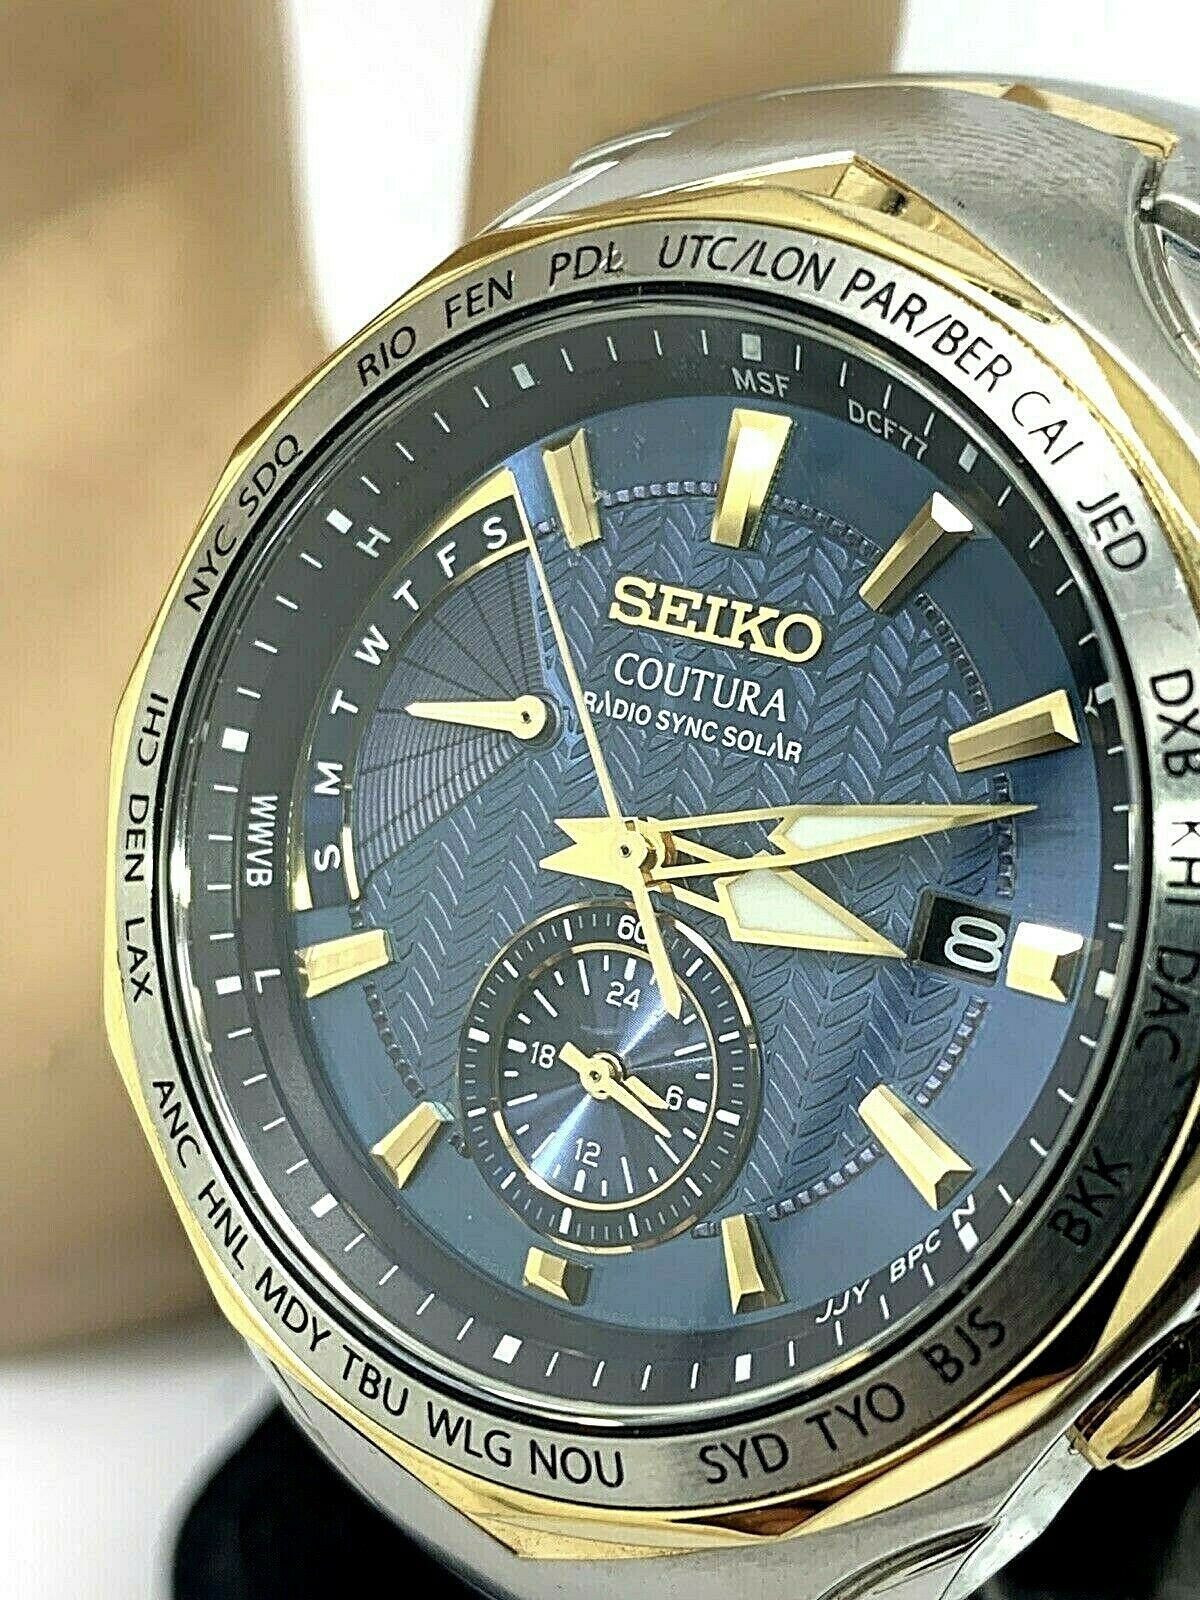 Seiko Coutura Radio Sync Solar Stainless Steel Two Tone Men's Watch SSG020  | WatchCharts